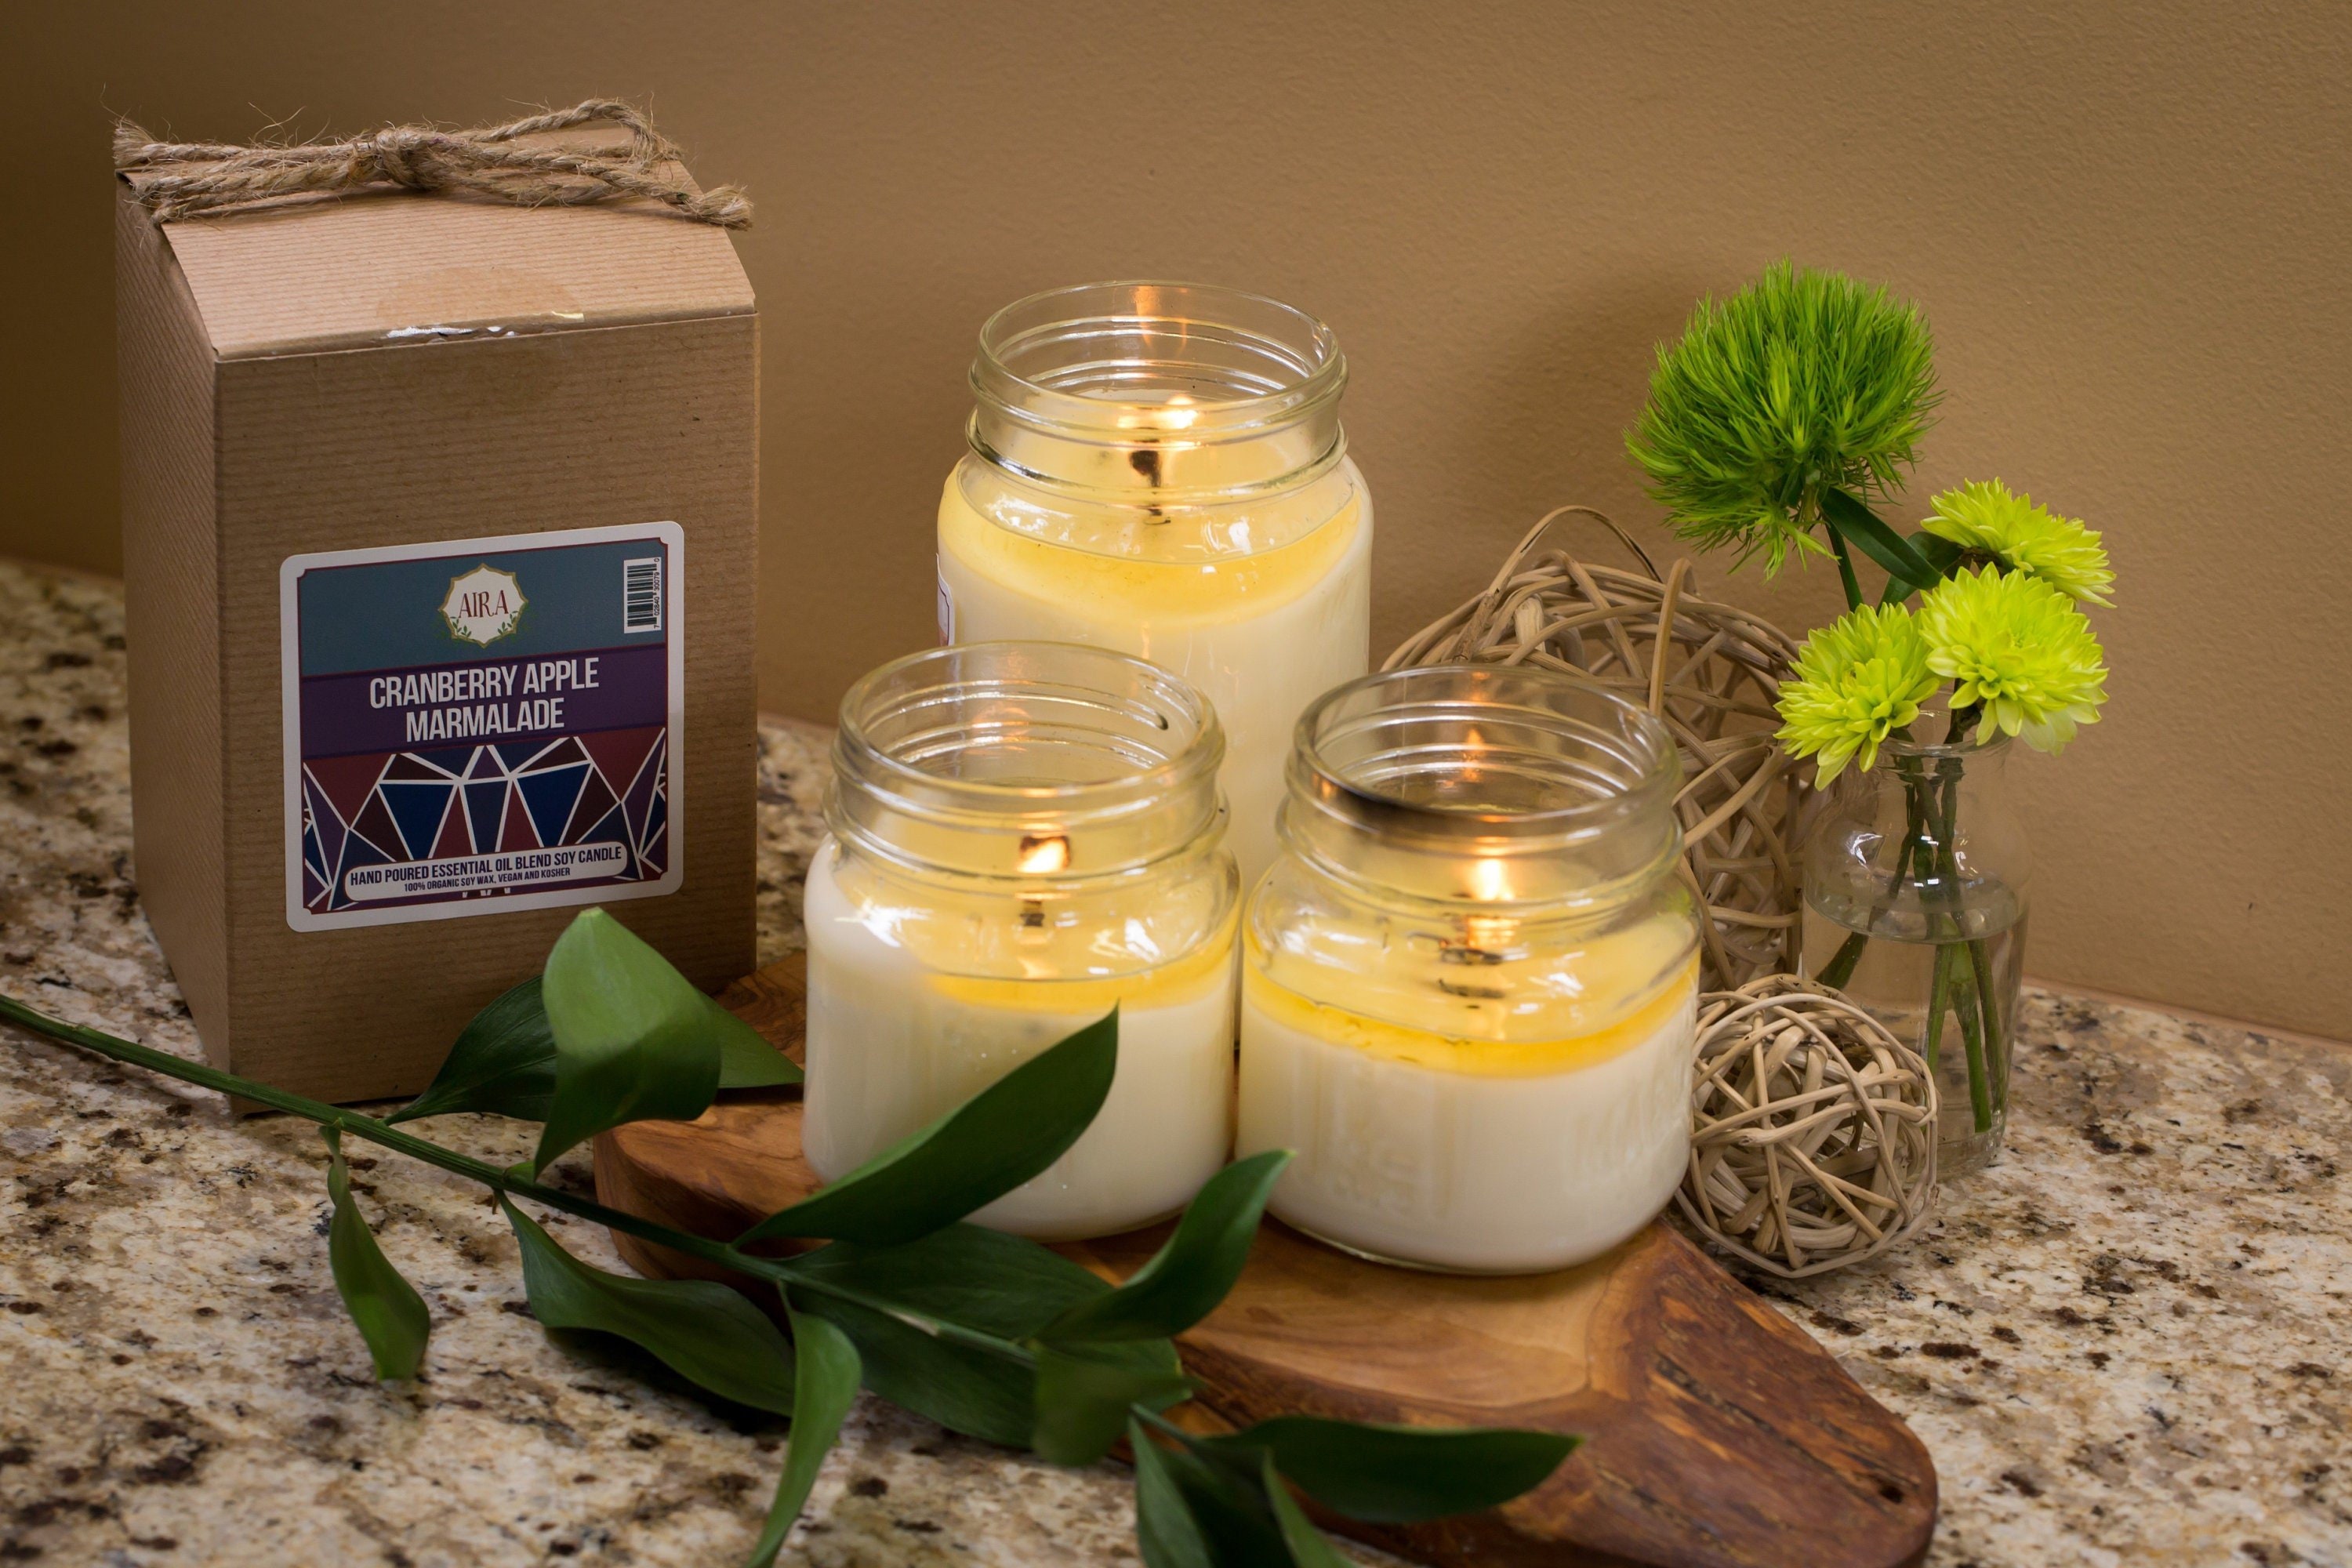 Aira Soy Candles - Organic, Kosher, Vegan Soy Candles w/ Therapeutic Grade Essential Oil - Hand-Poured w/ Pure Soy Candle Wax - Paraffin Free, Burns